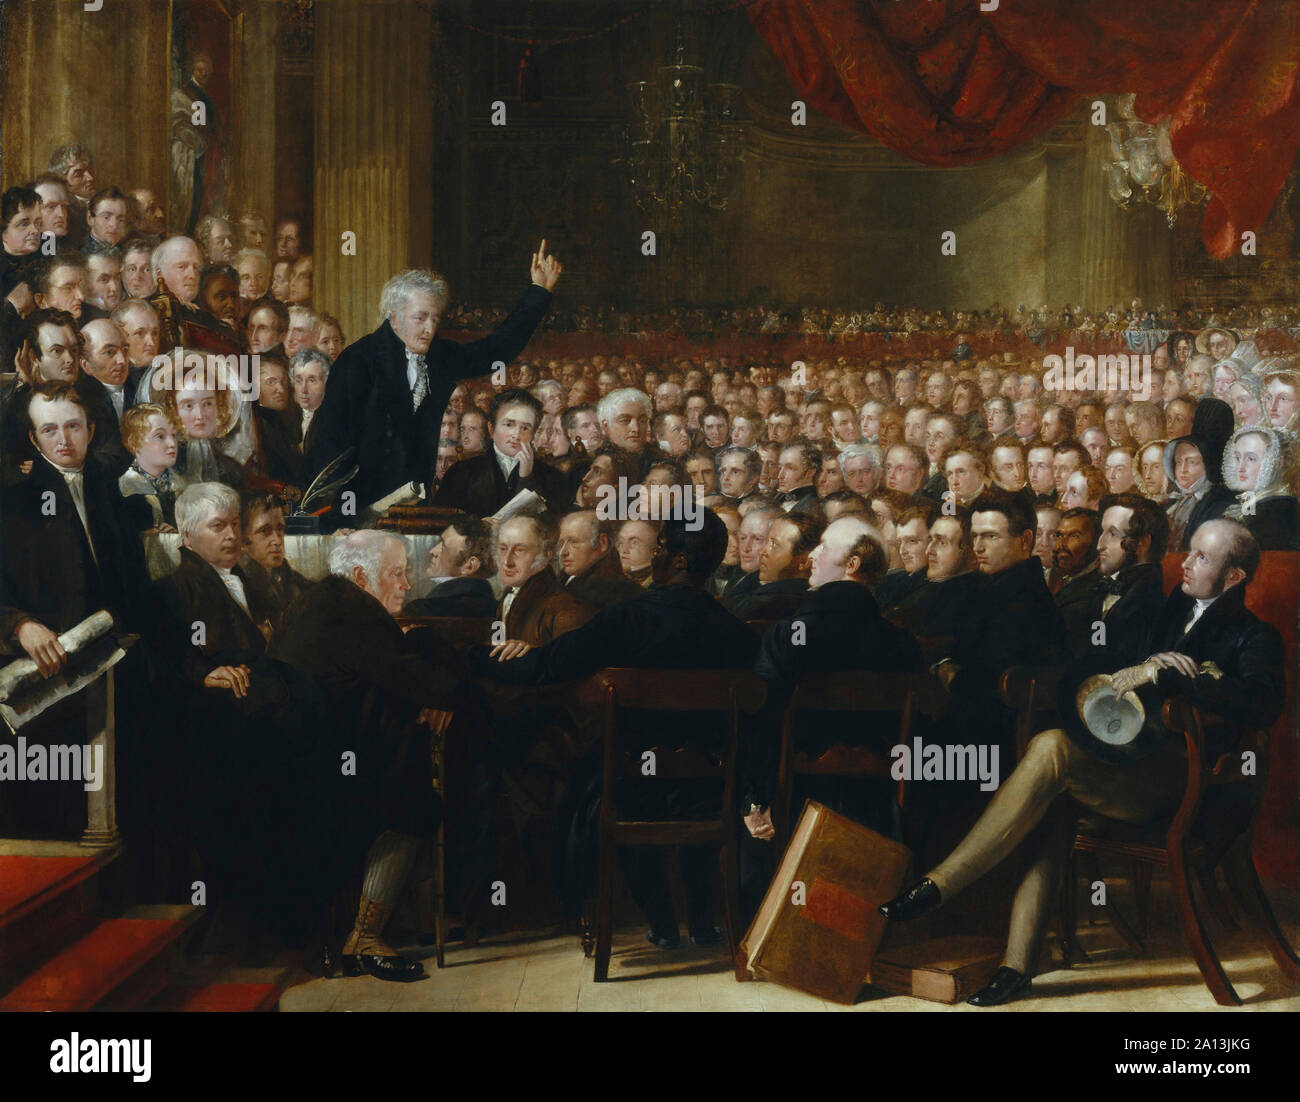 Oil painting of the 1840 convention of the British and Foreign Anti-Slavery Society. Stock Photo